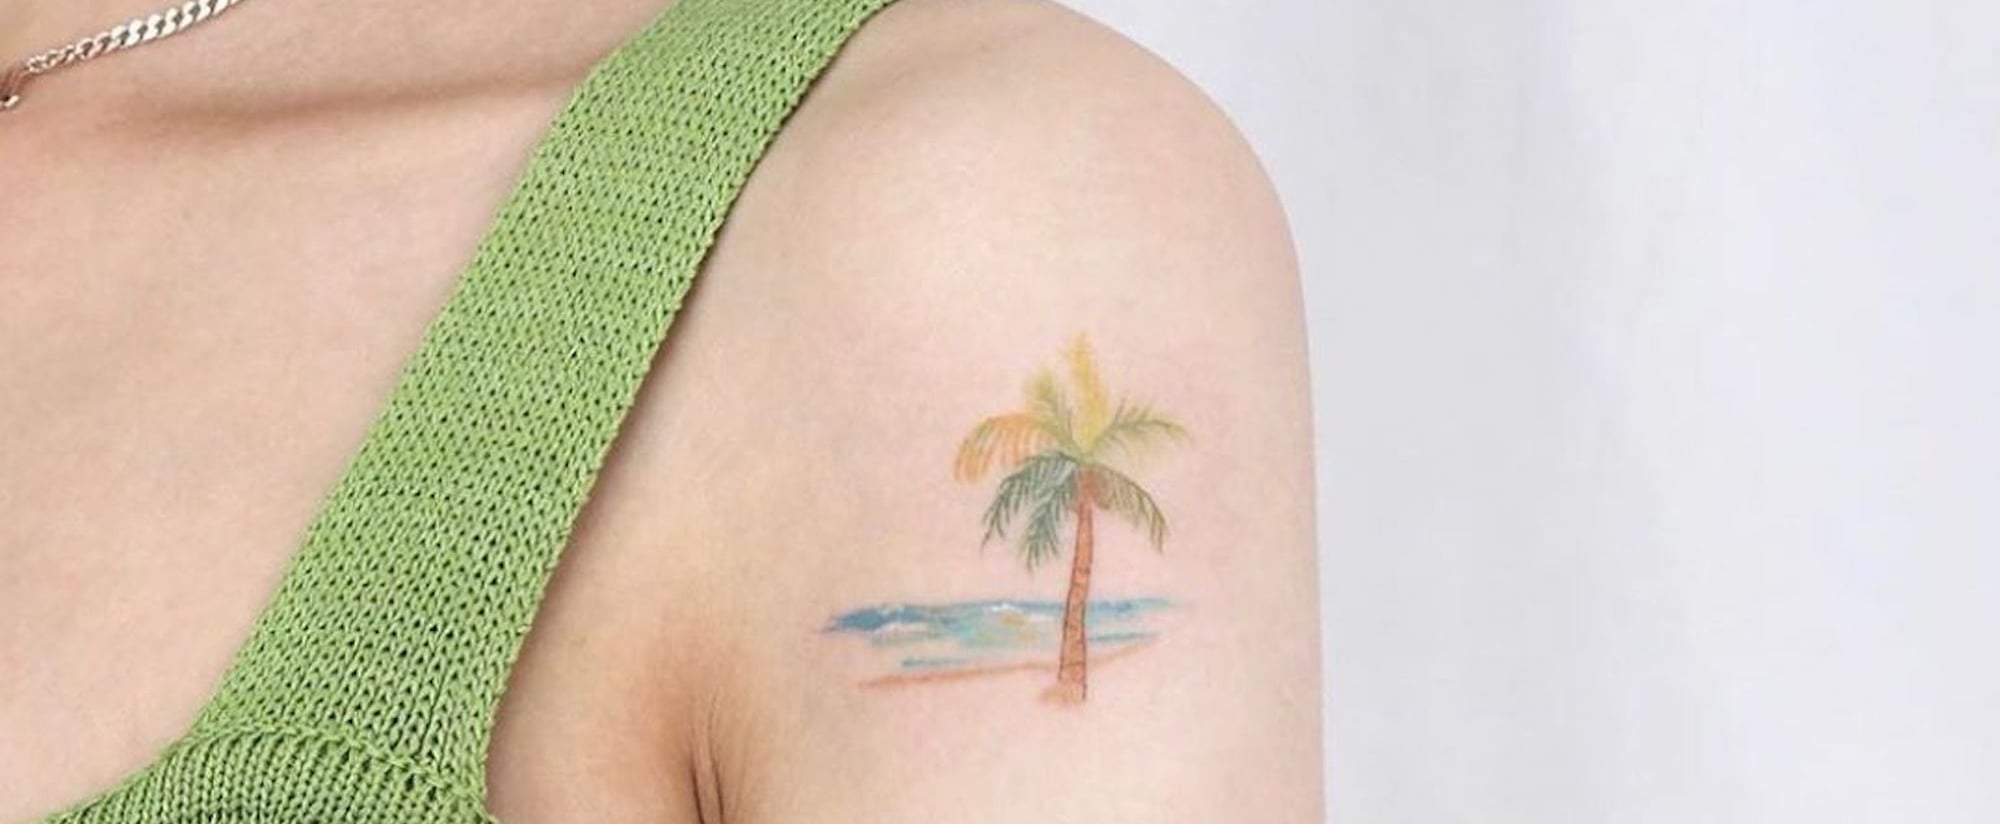 2. Matching Palm Tree Tattoos for Couples - wide 6